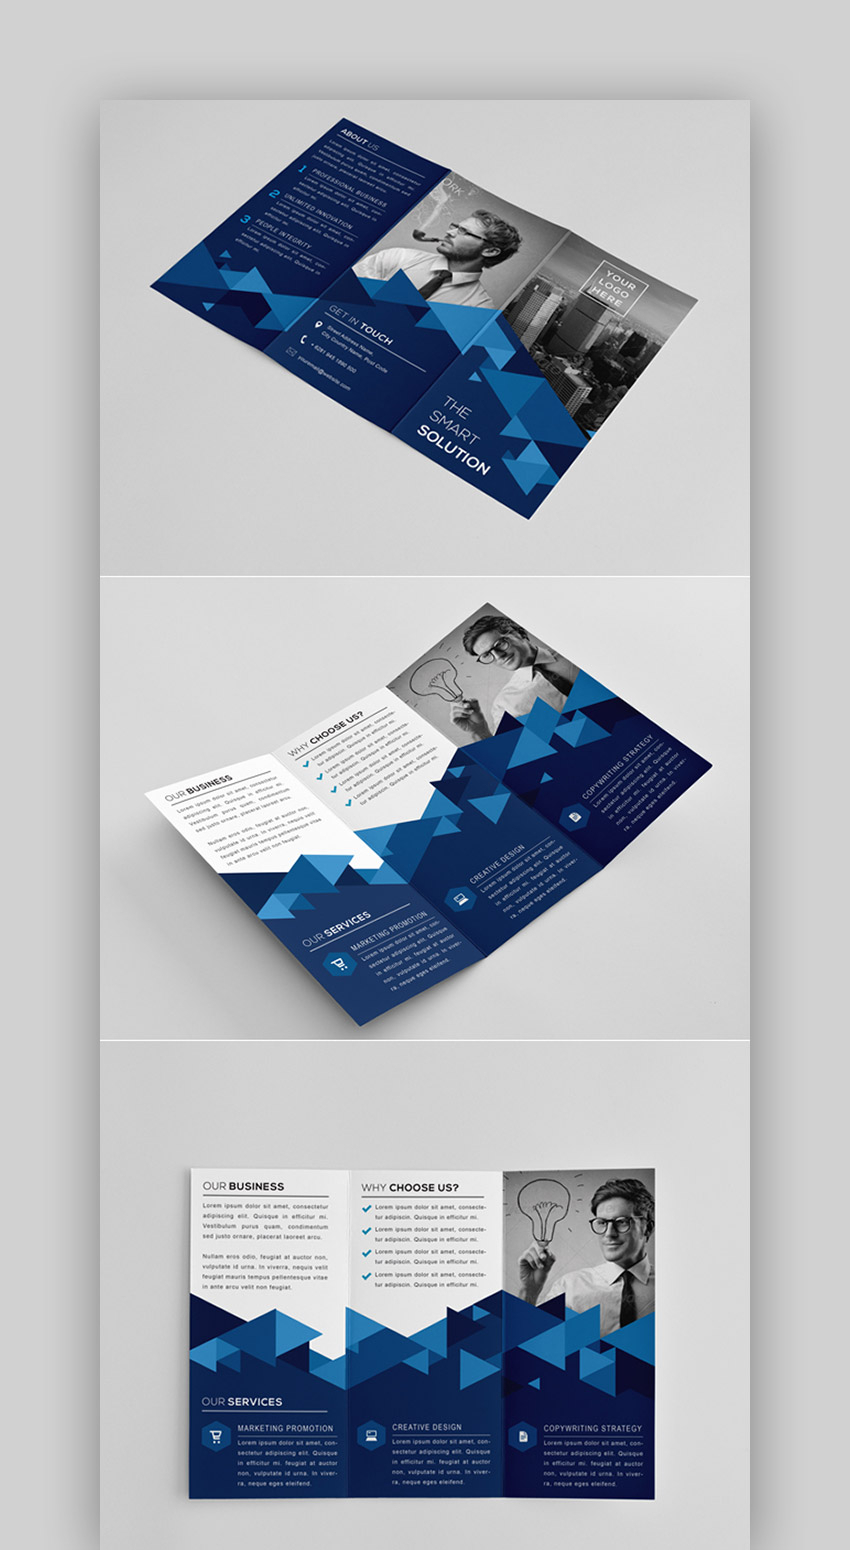 010 The Modern Tri Fold Brochure Template Indesign Indd Within Tri Fold Brochure Template Indesign Free Download